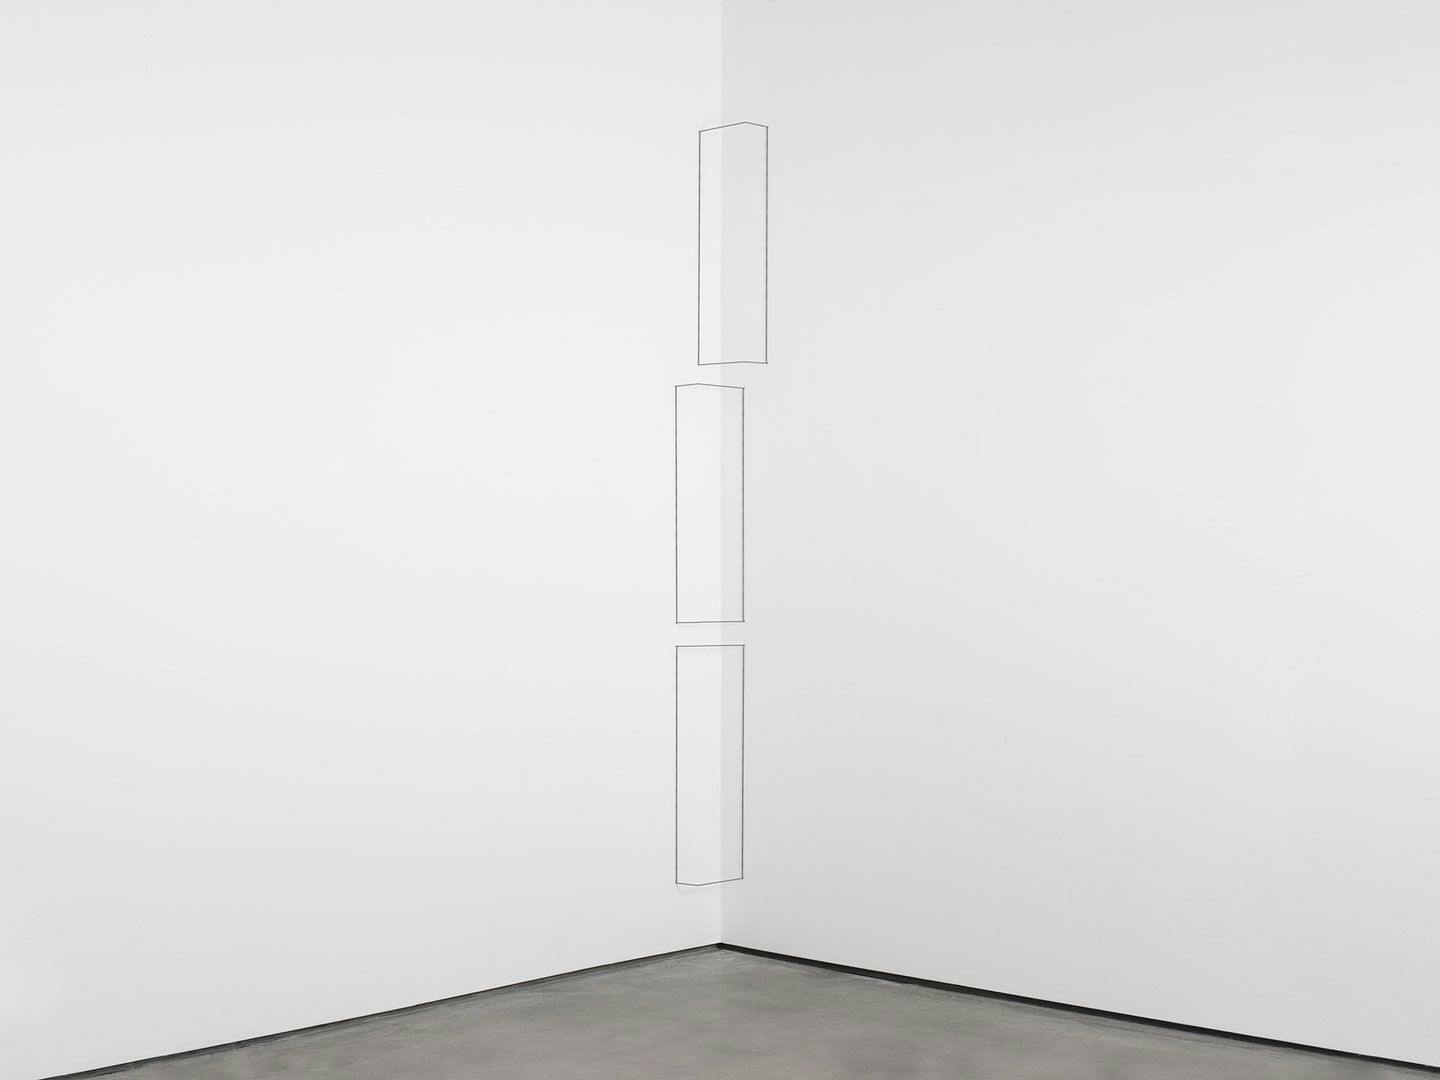 A sculpture by Fred Sandback, titled Untitled (RLL of A Series of Eight Sculptures, Closed Series), dated 1969.